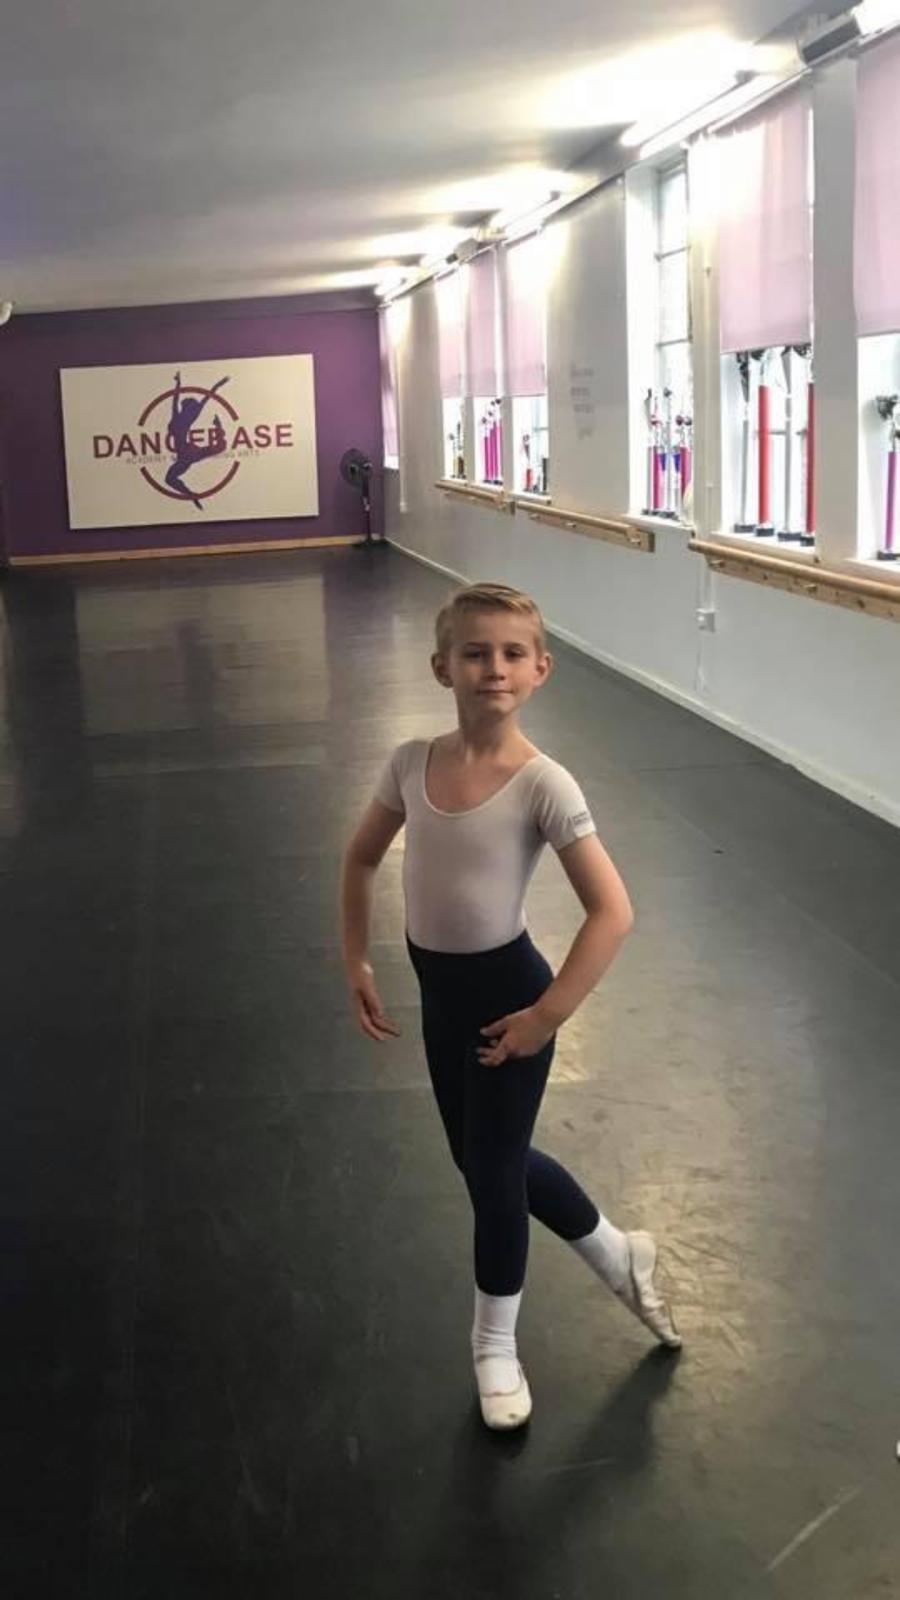 Sam Brown, from Drumchapel, is a student at Dancebase Academy in Dumbarton